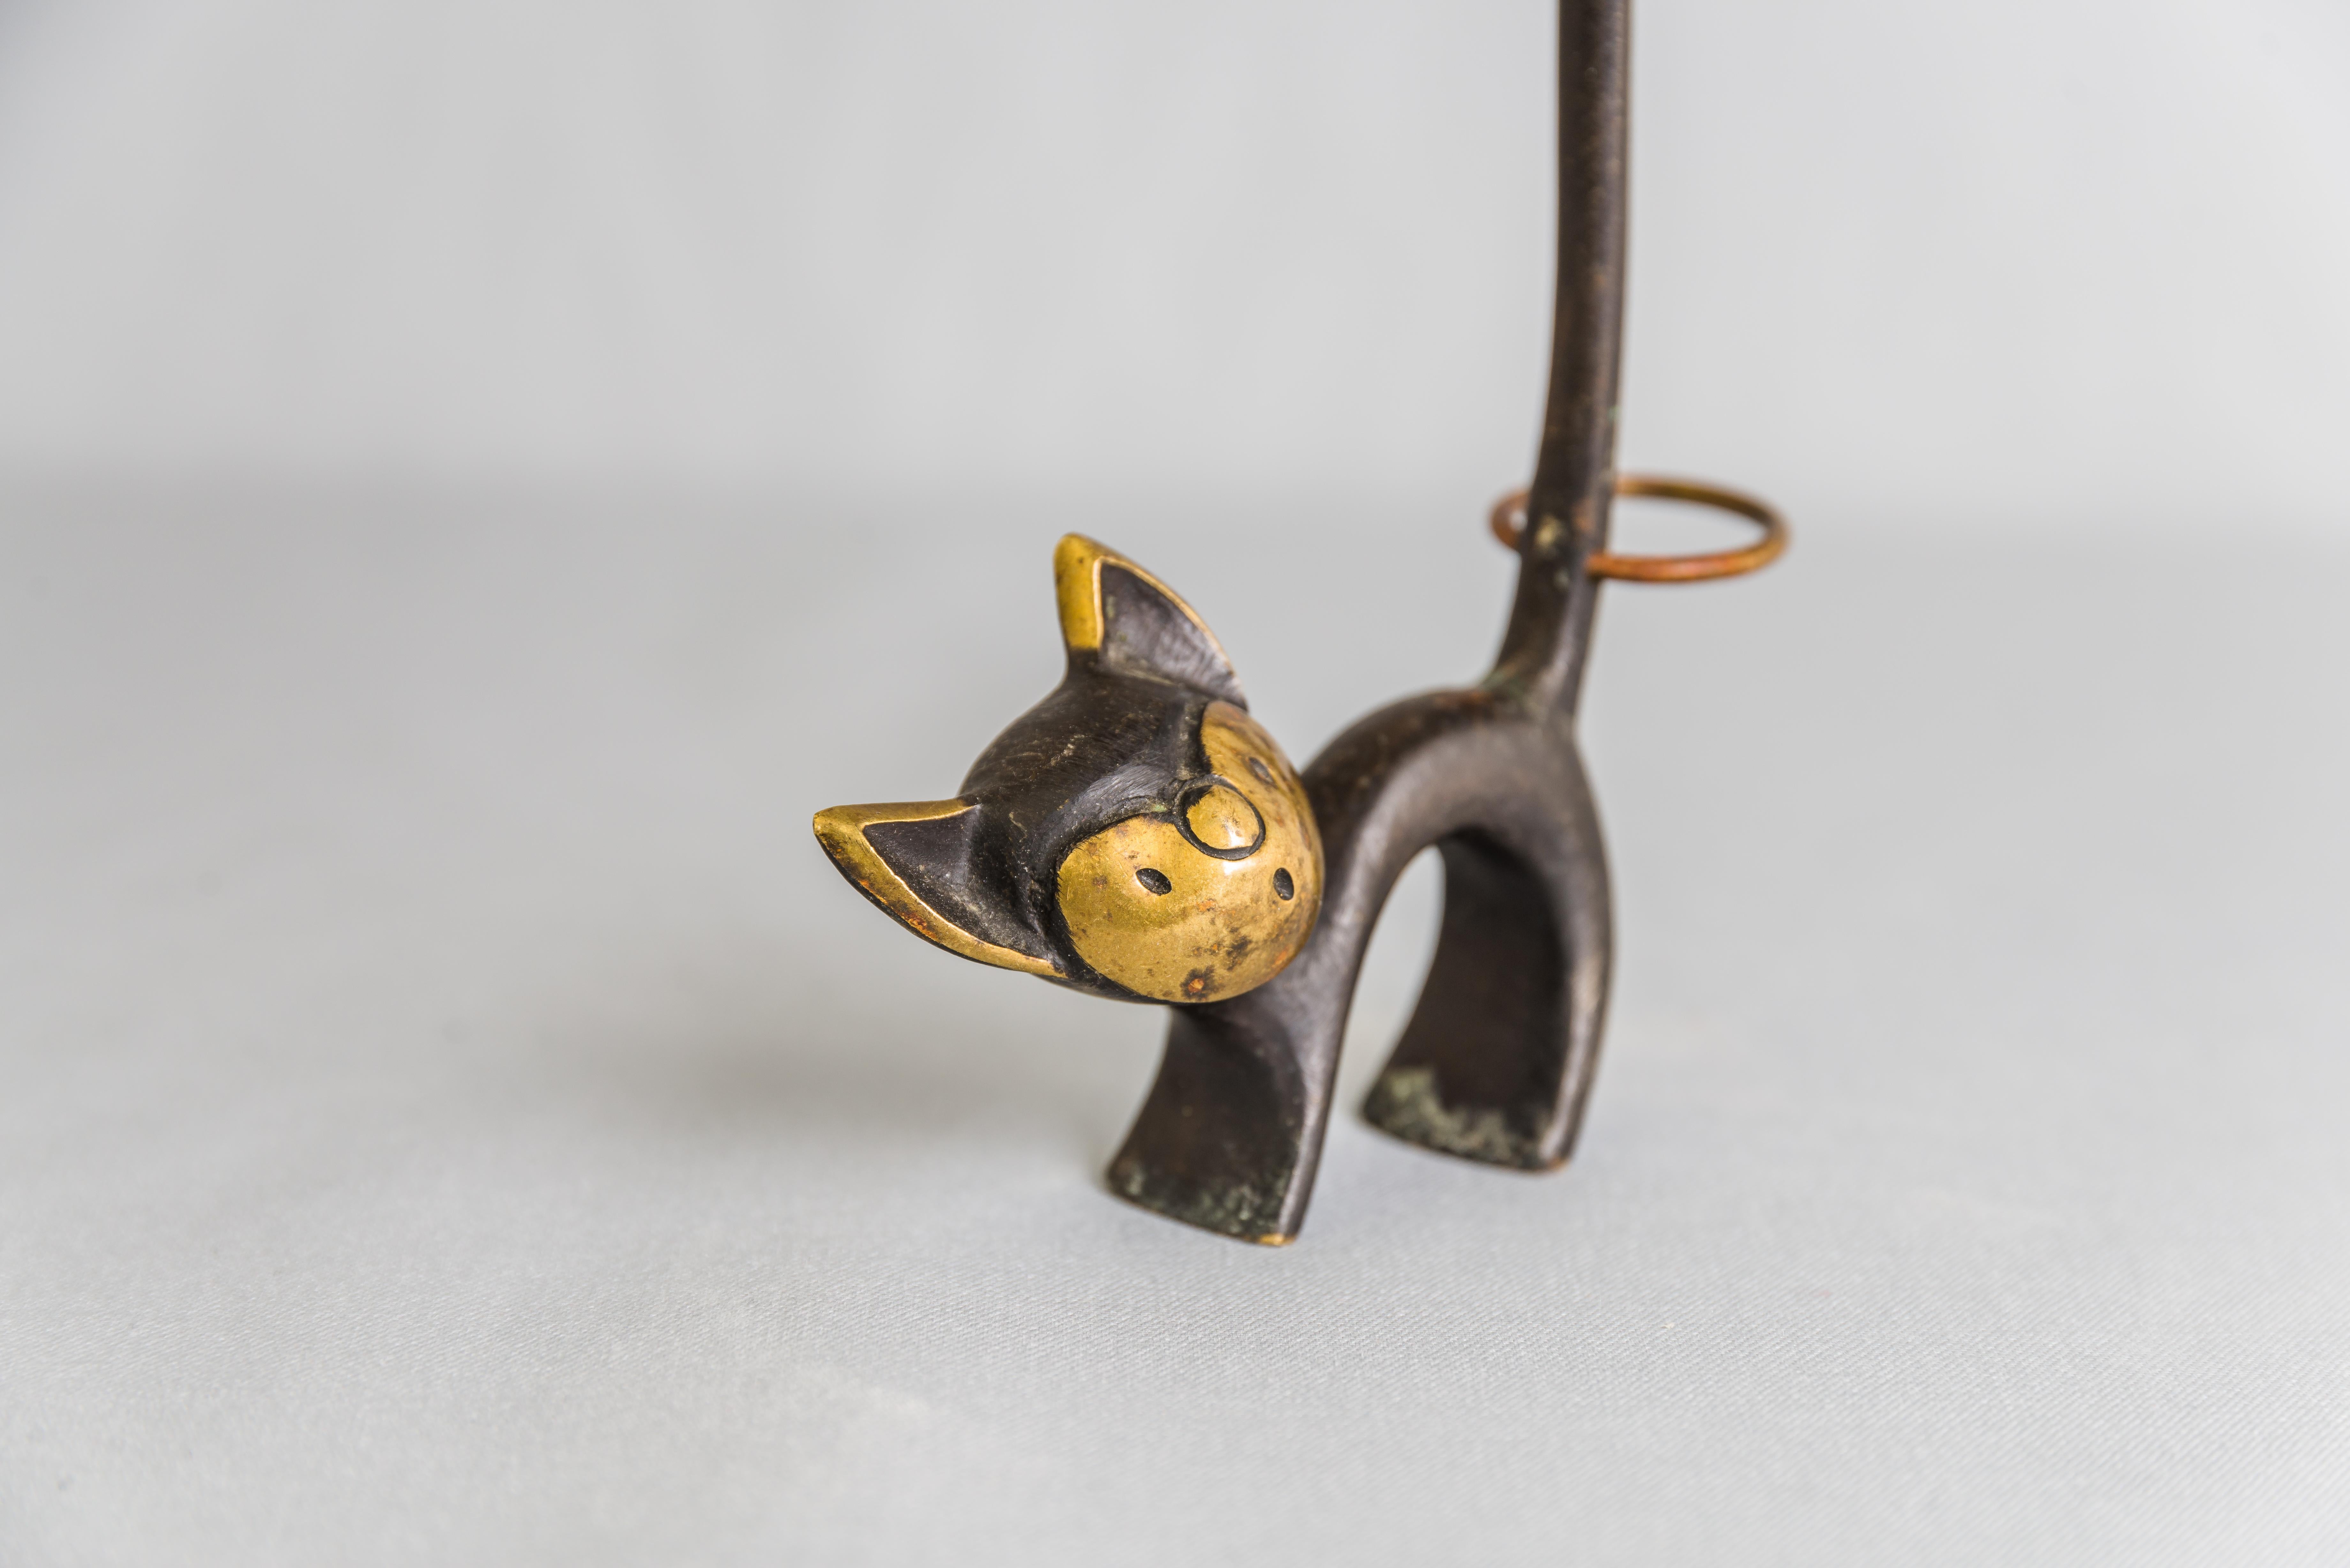 Austrian brass cat figurine, usually made to be used as a pretzel holder, a decorative piece, very suitable as a ring holder.
Original condition.